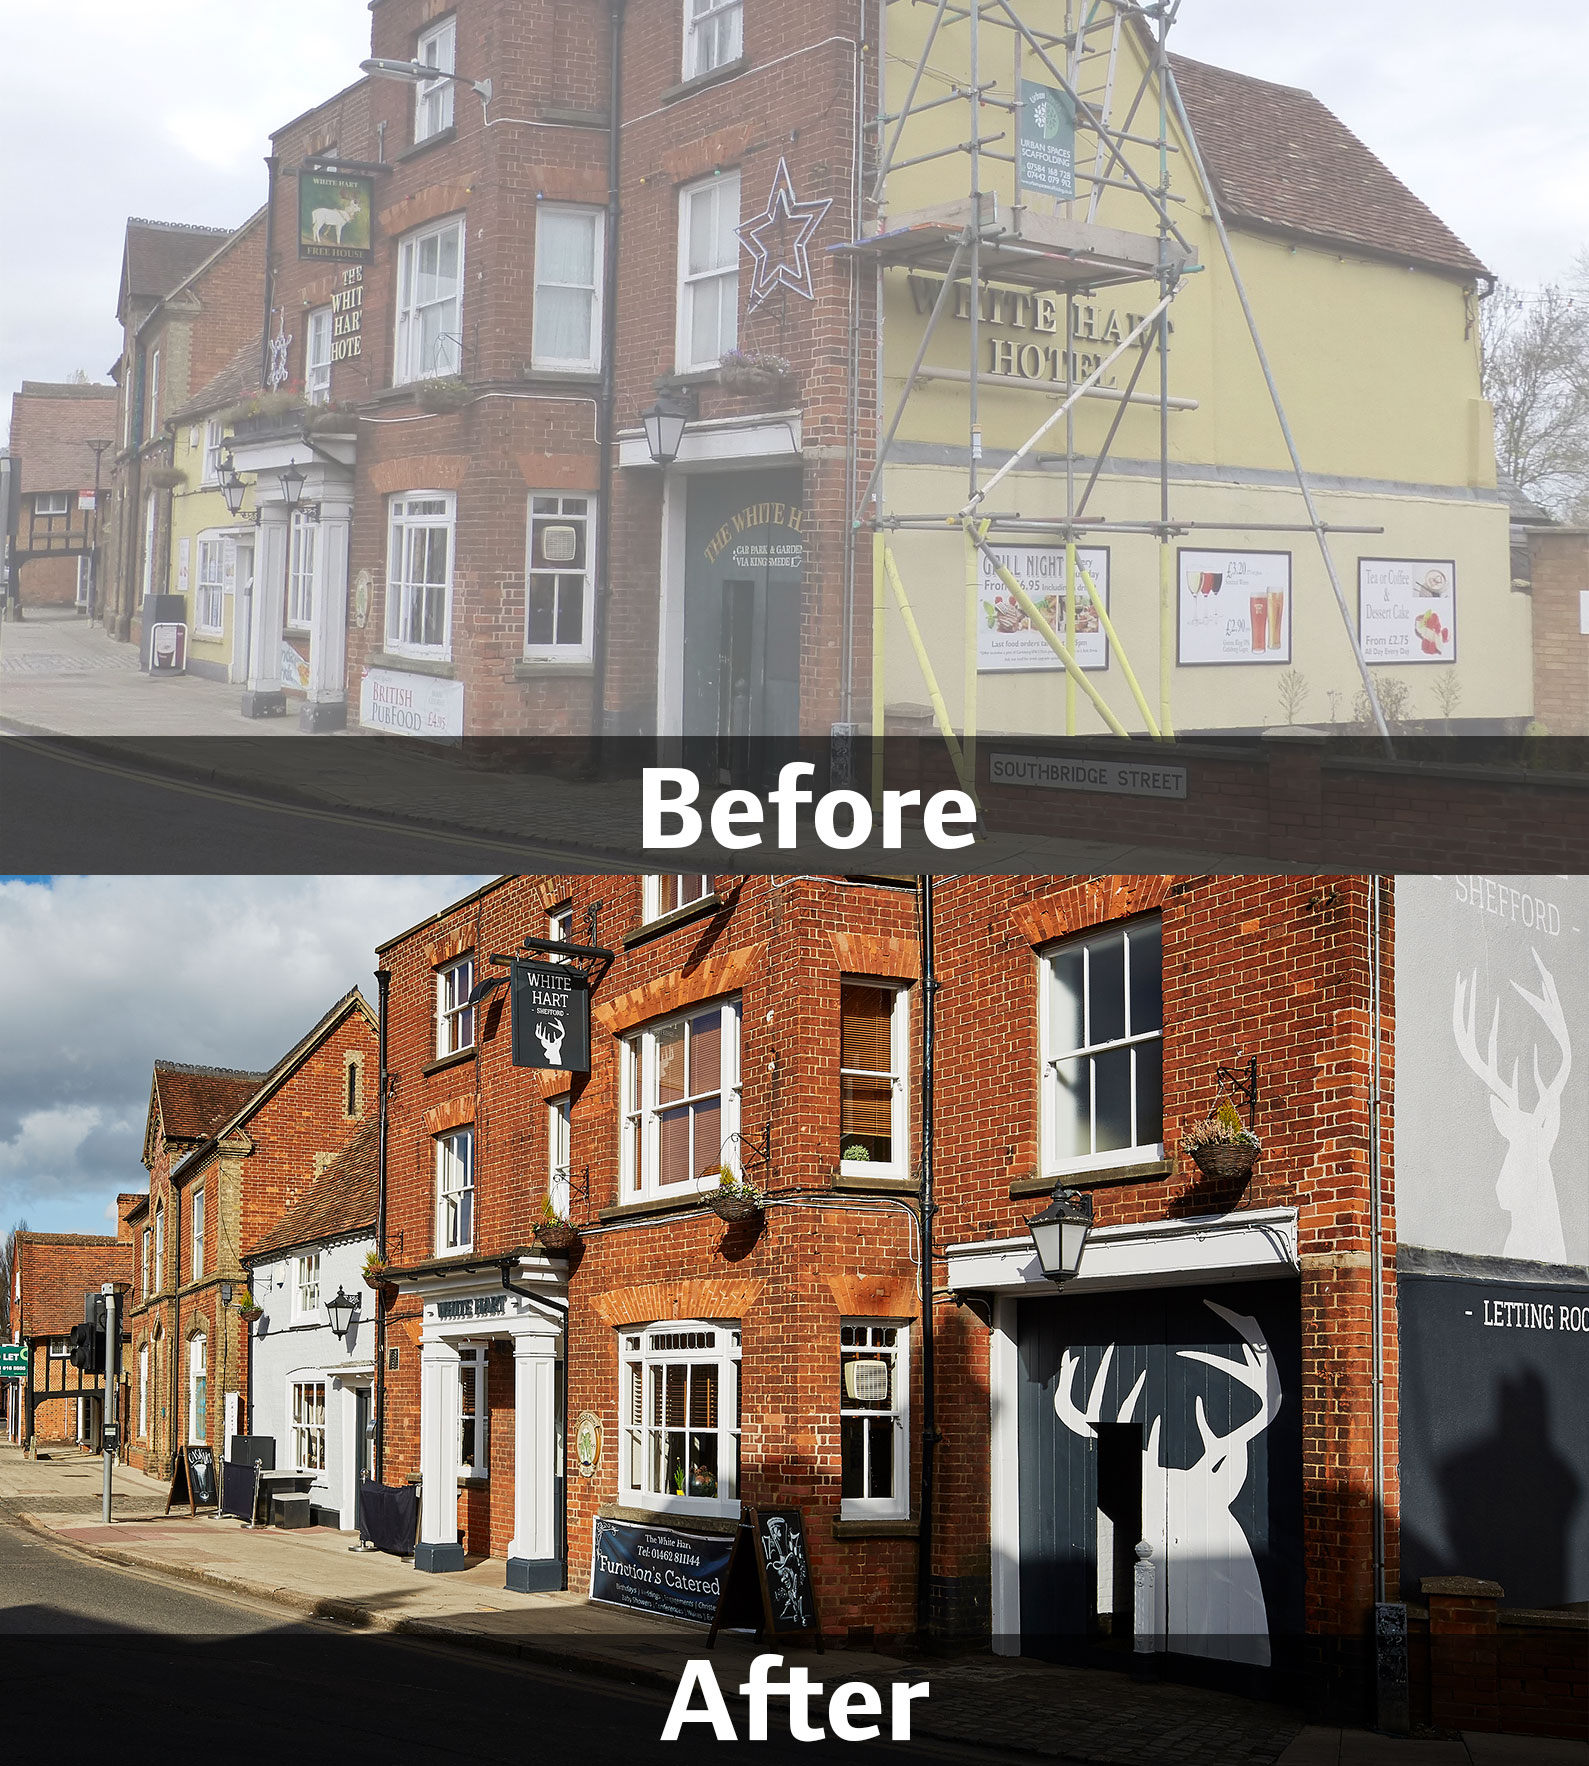 White Hart, Shefford, before and after